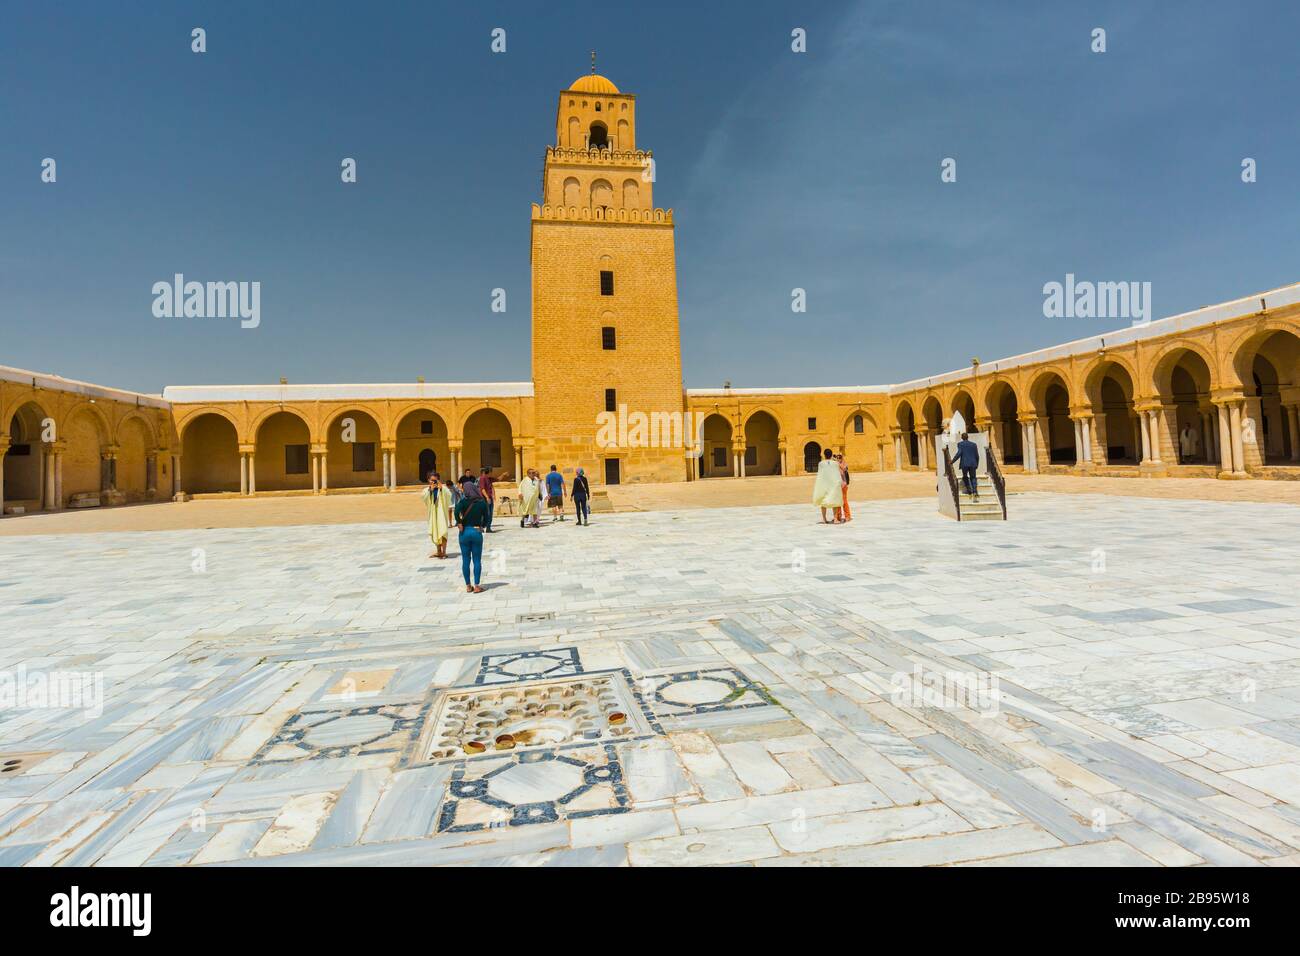 Courtyard of a mosque. Stock Photo